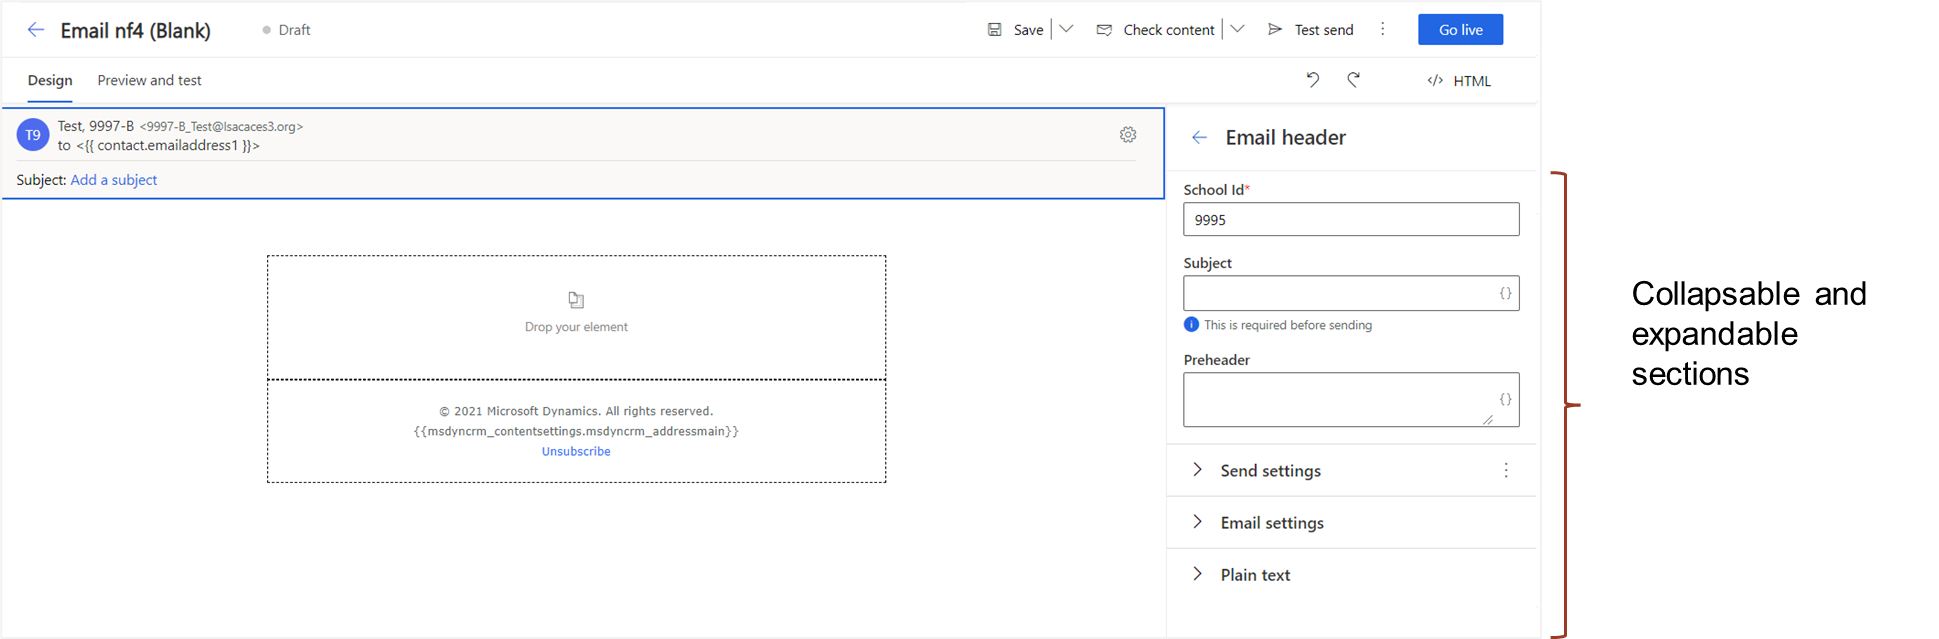 Image shows expanded Email header section with options available.